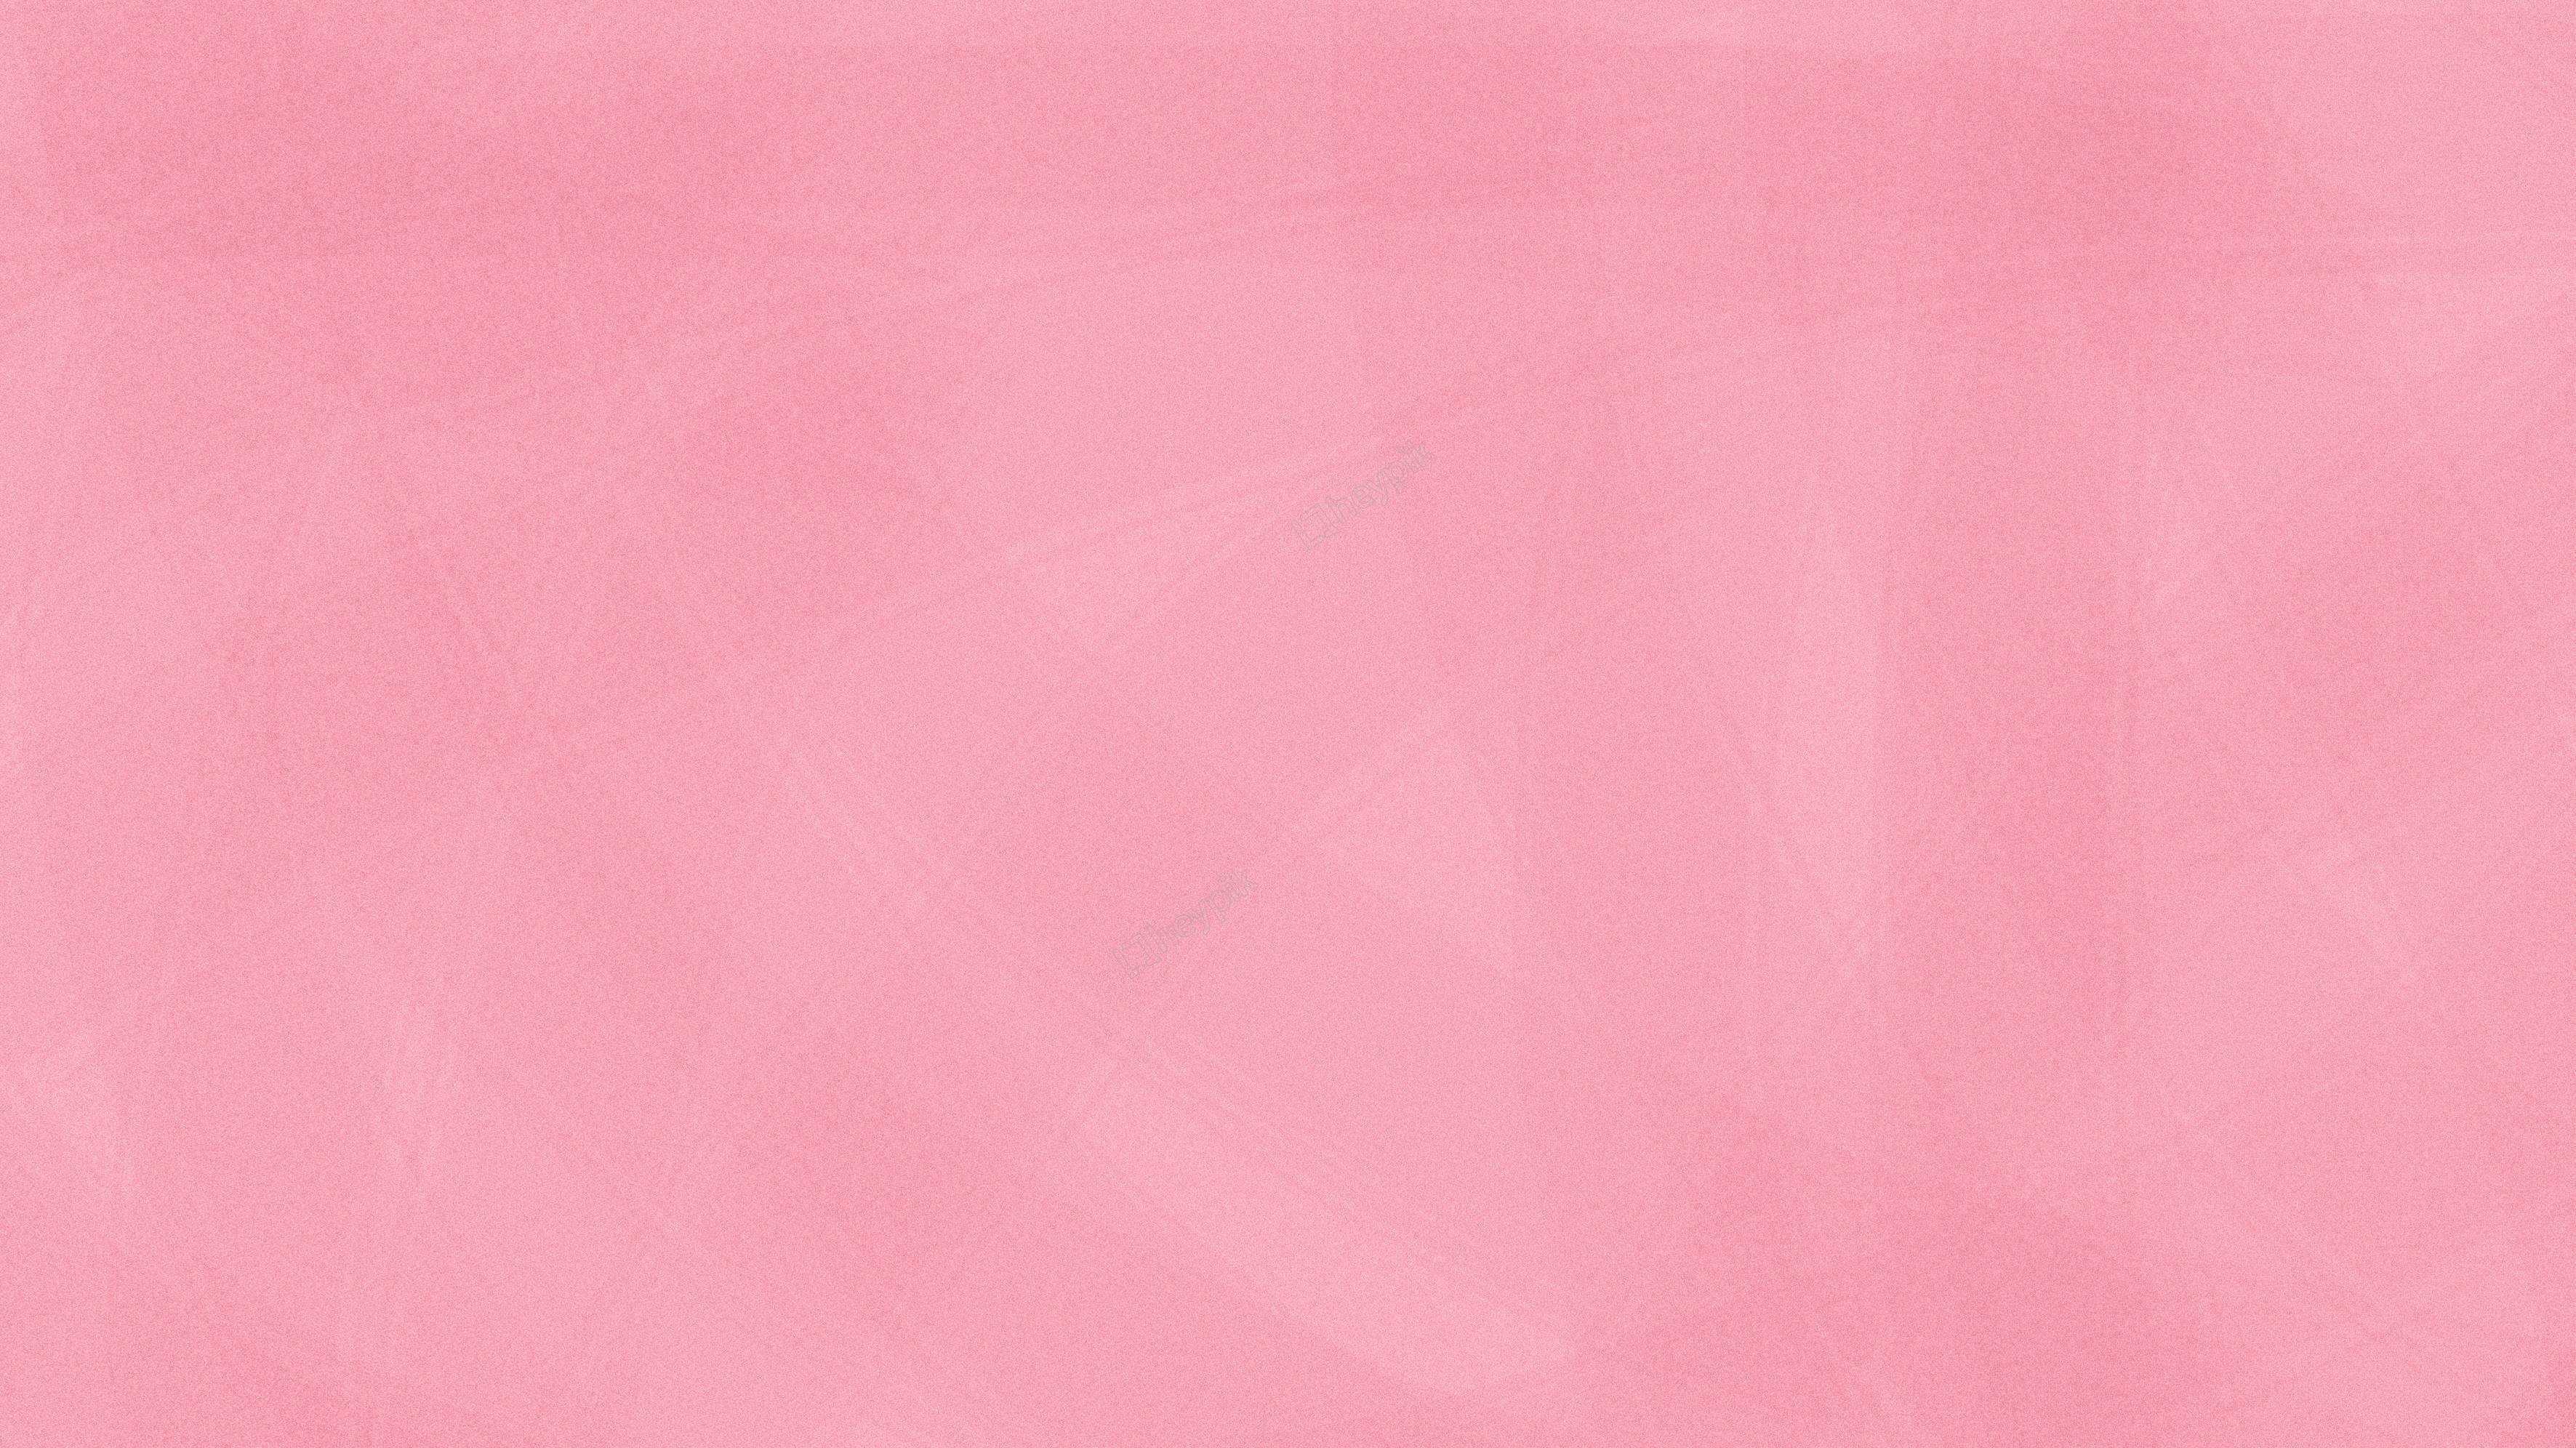 3543x1992 Simple pink background design?>